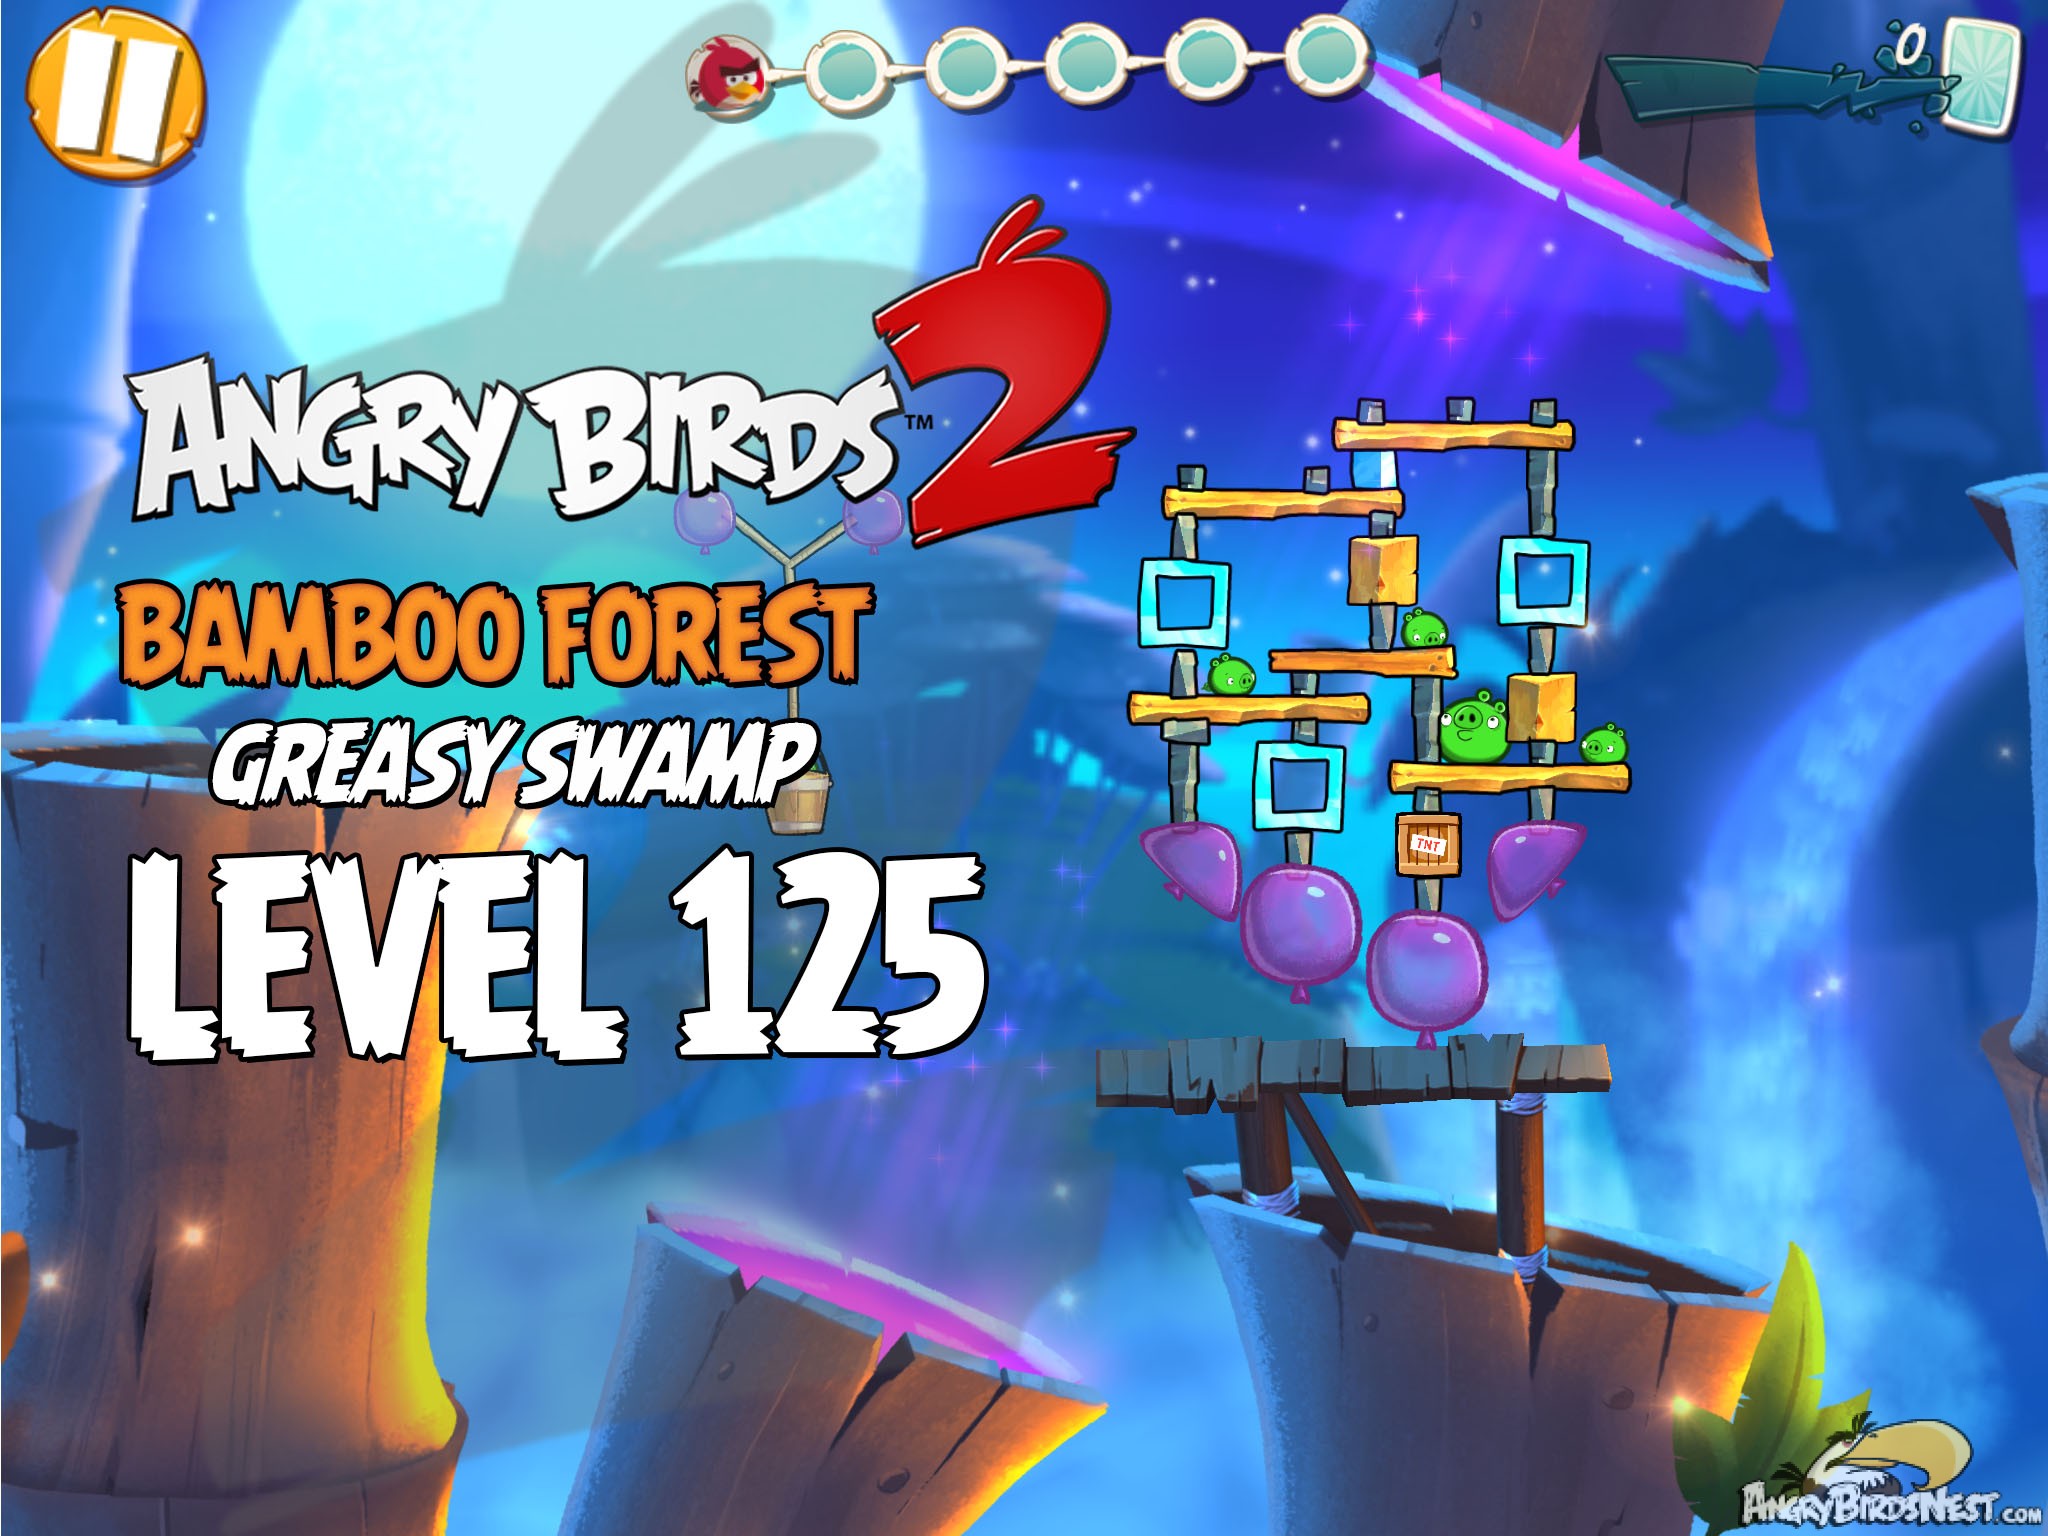 Angry Birds 2 Bamboo Forest Greasy Swamp Level 125